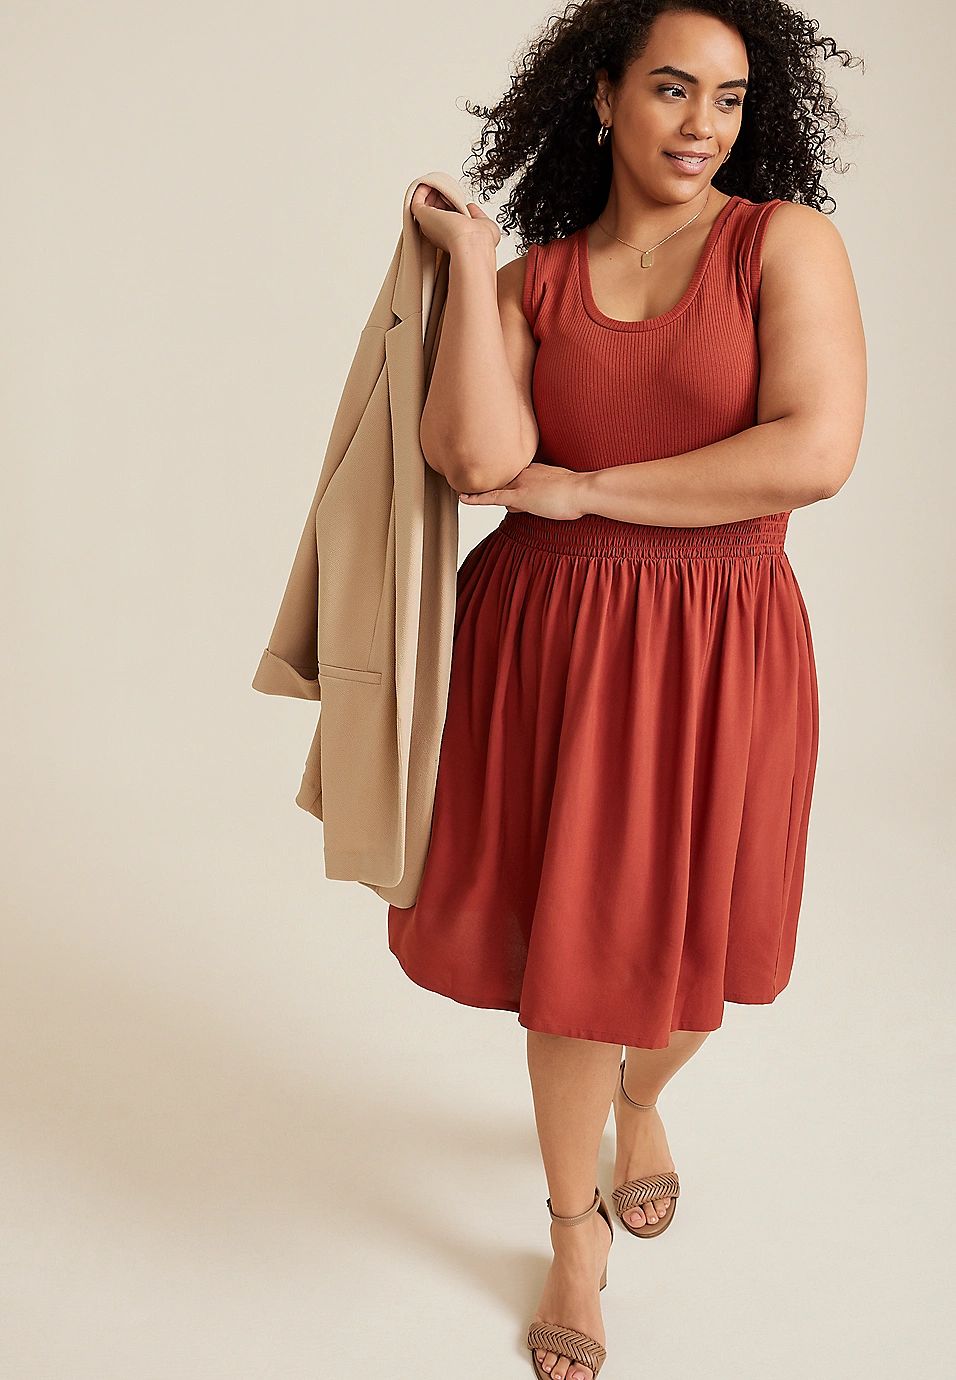 Plus Size Mixed Media Skater Dress | Maurices